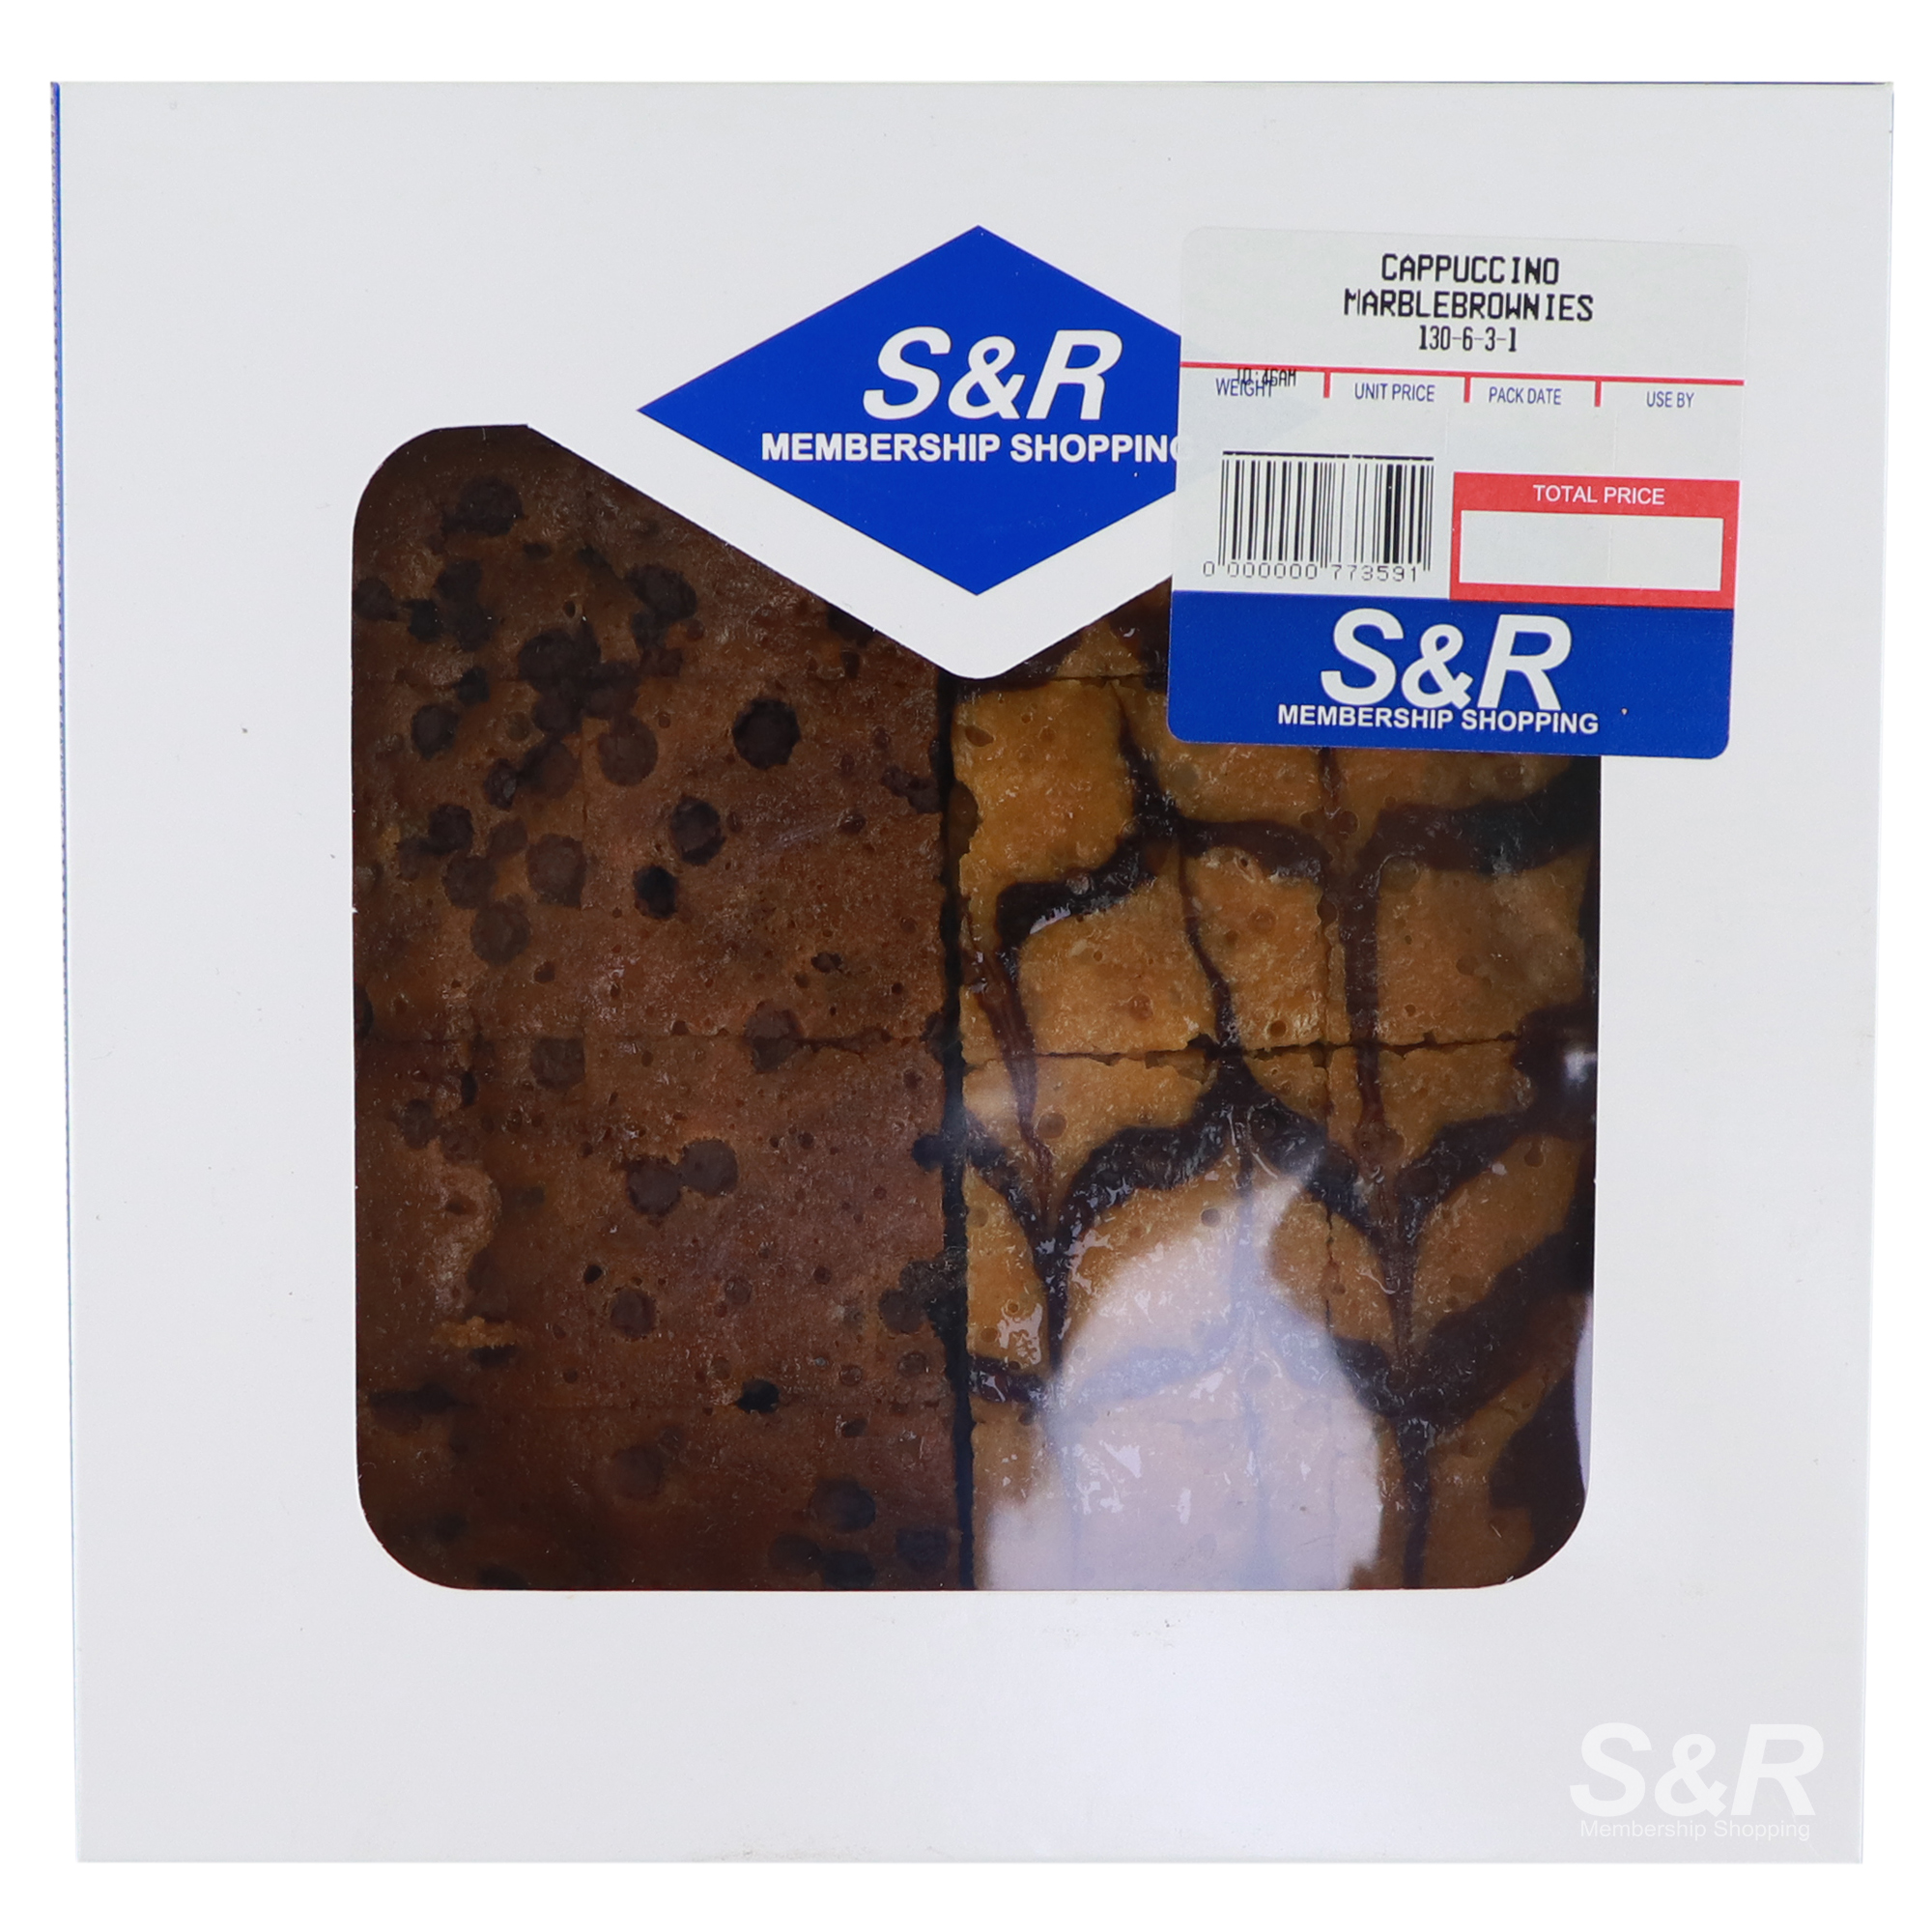 S&R Cappuccino Marble Brownies 16 slices